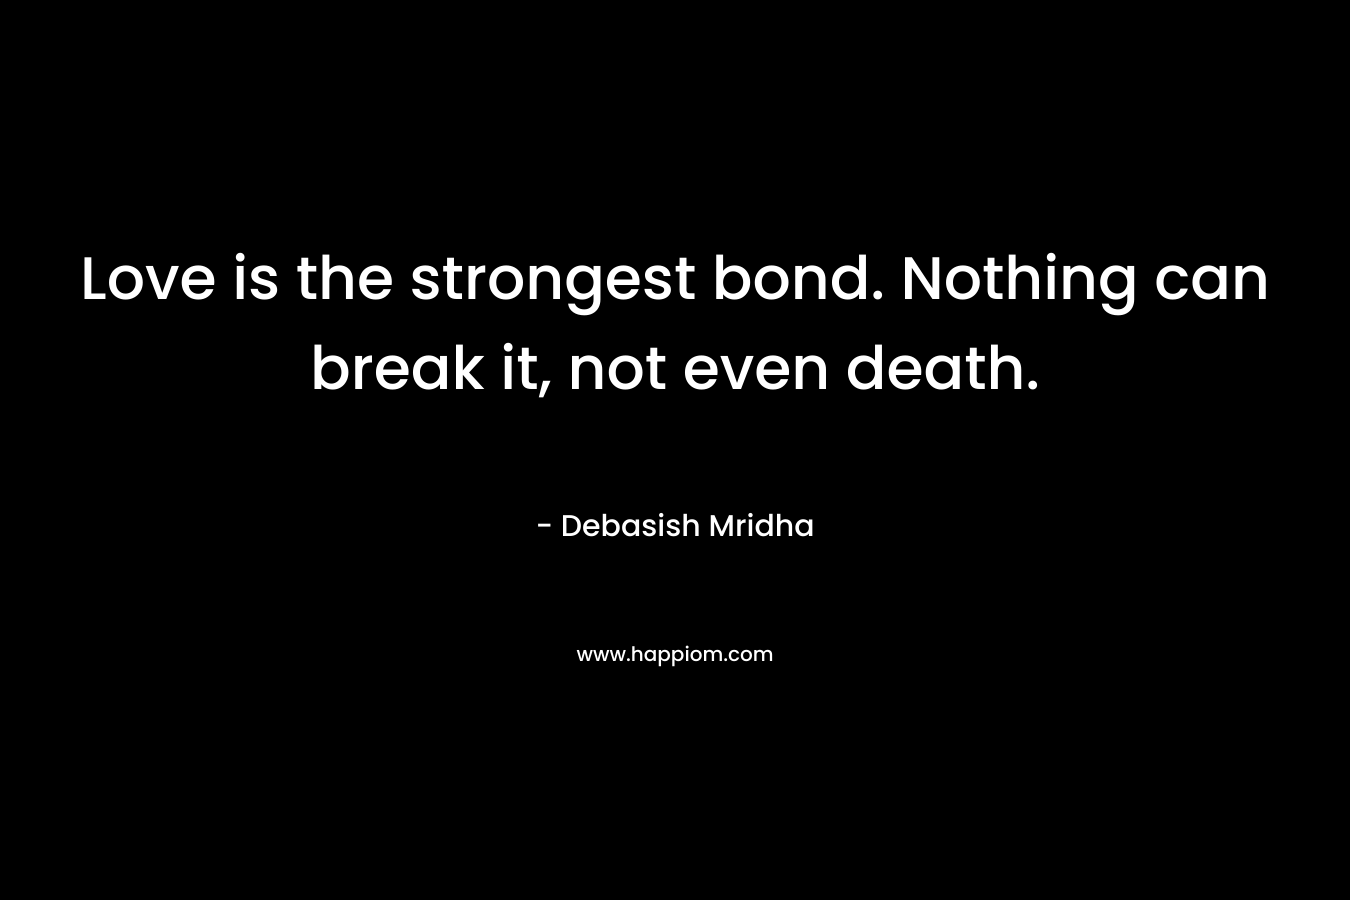 Love is the strongest bond. Nothing can break it, not even death. – Debasish Mridha